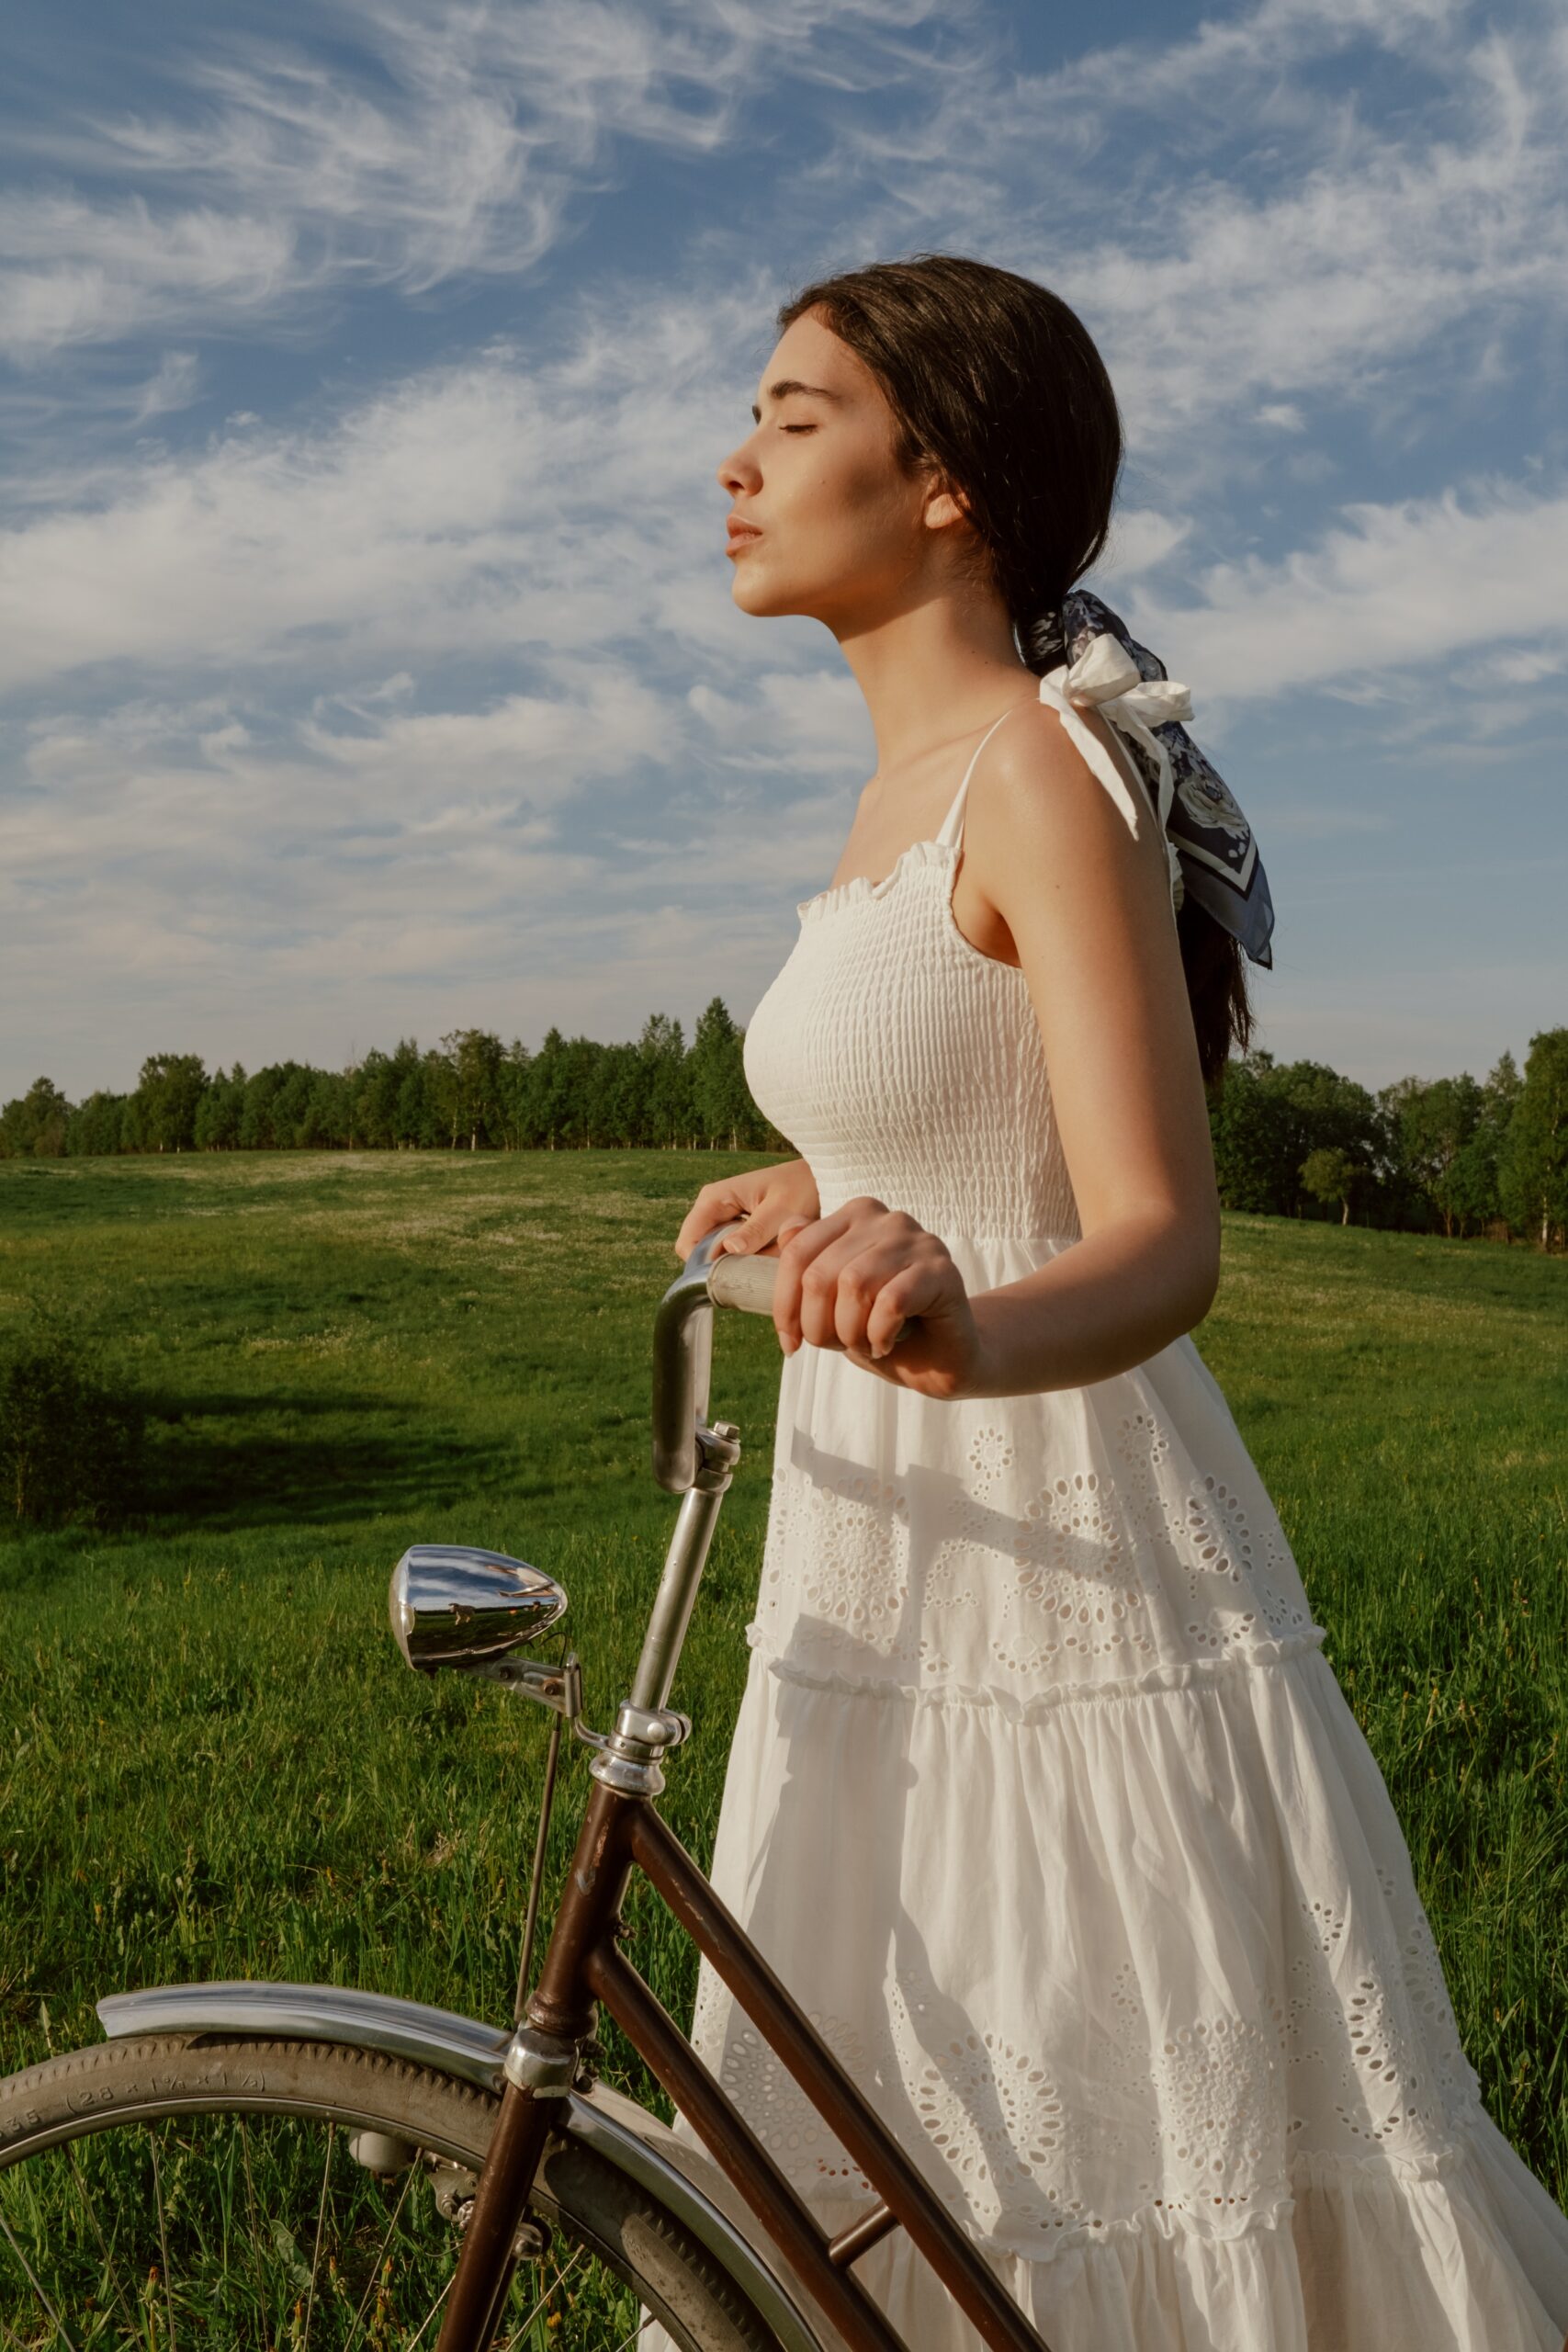 Woman in White Dress with Bicycle